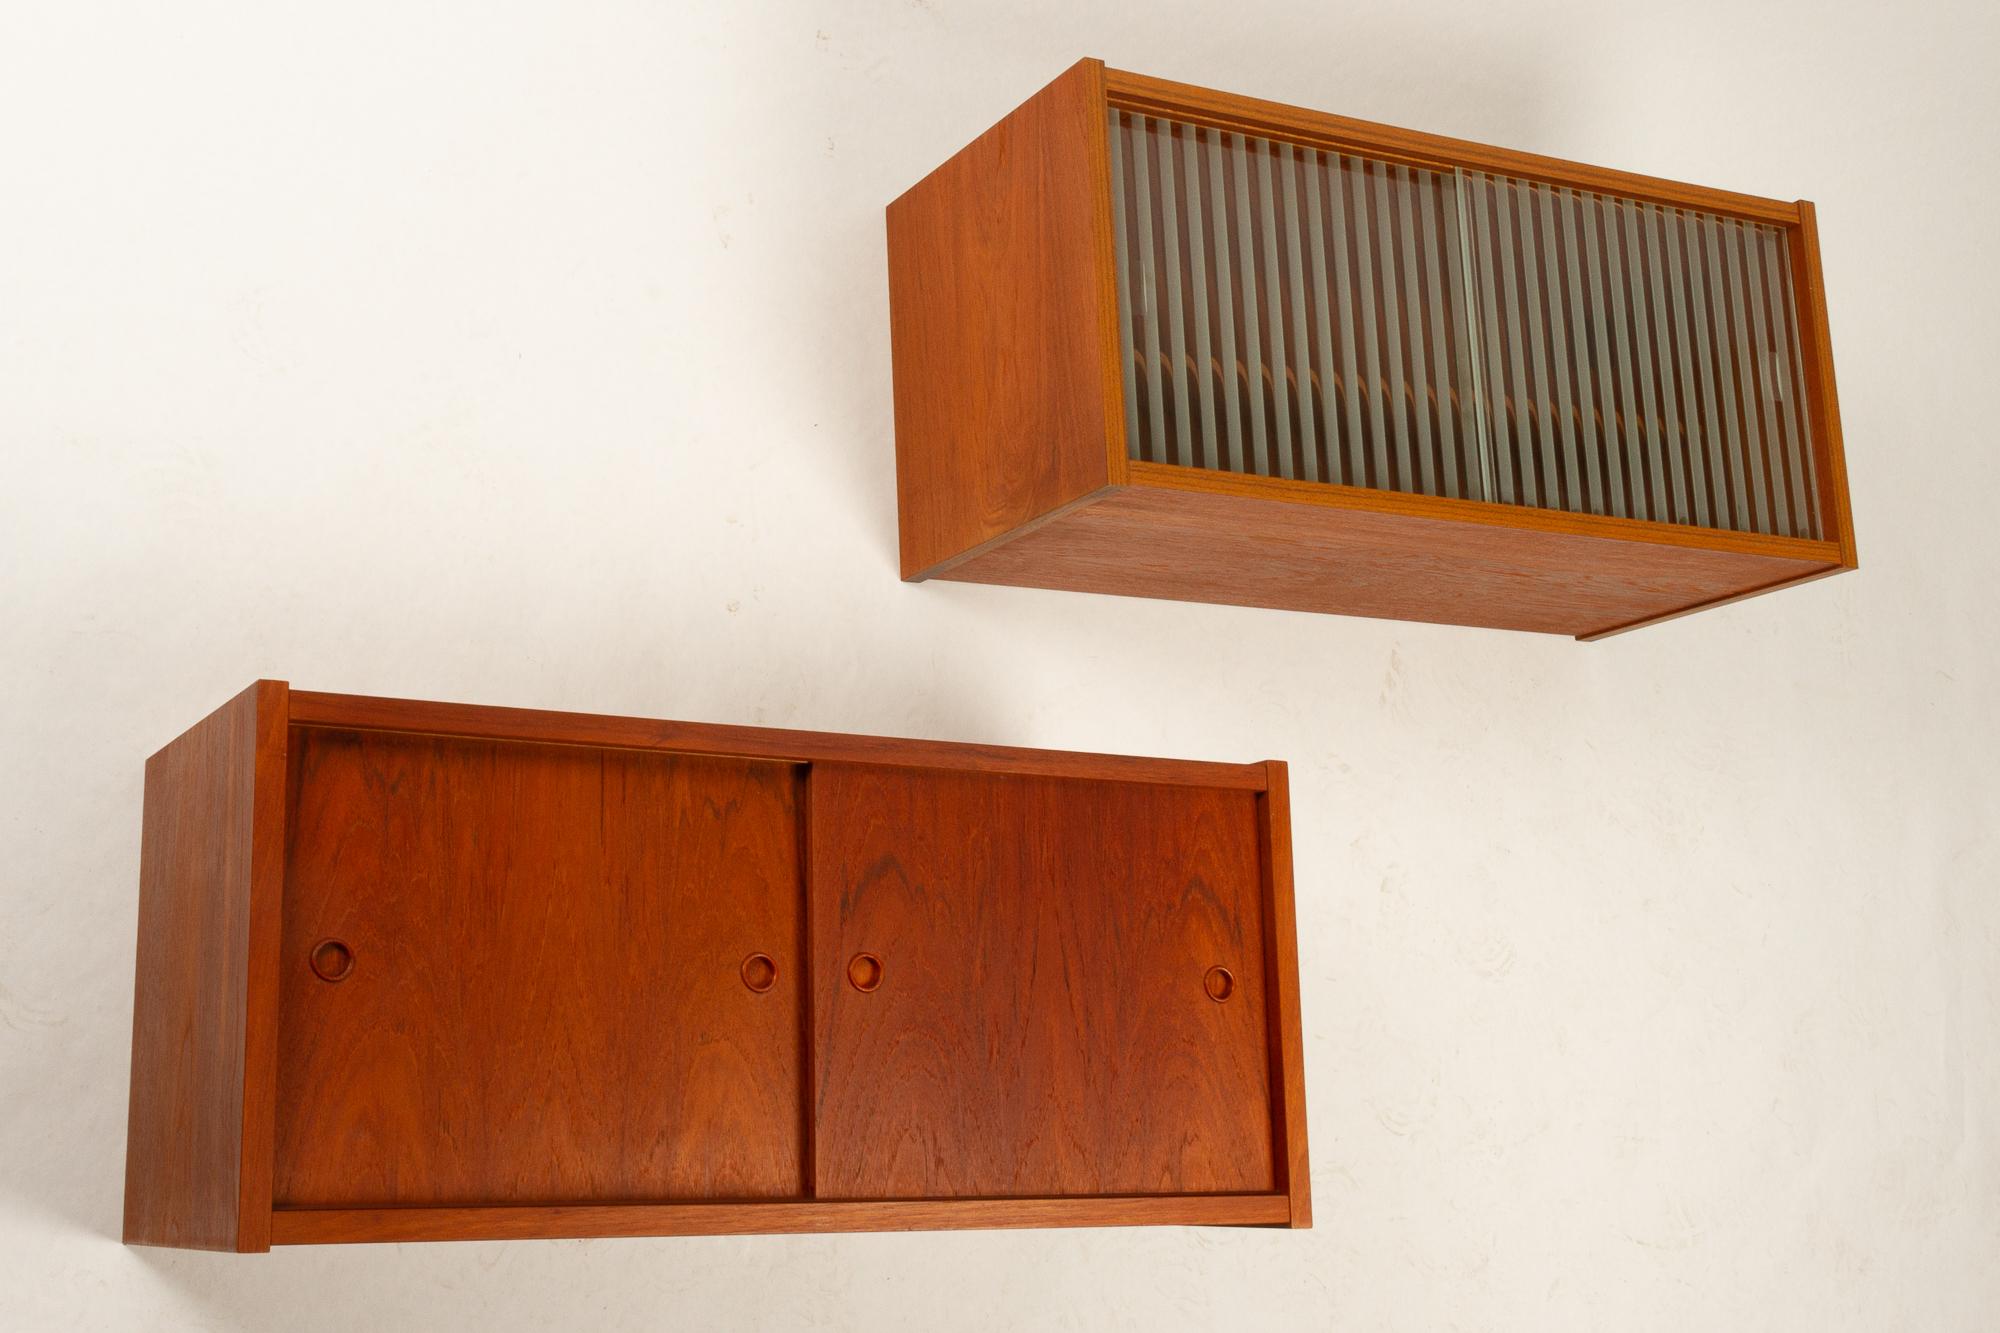 Modular wall units by Preben Sørensen for Randers Møbelfabrik, 1960s.
Set of two modular wall units in teak veneer, known as the PS System.
One unit with double sliding doors in teak with round teak grips. One with double glass sliding doors with